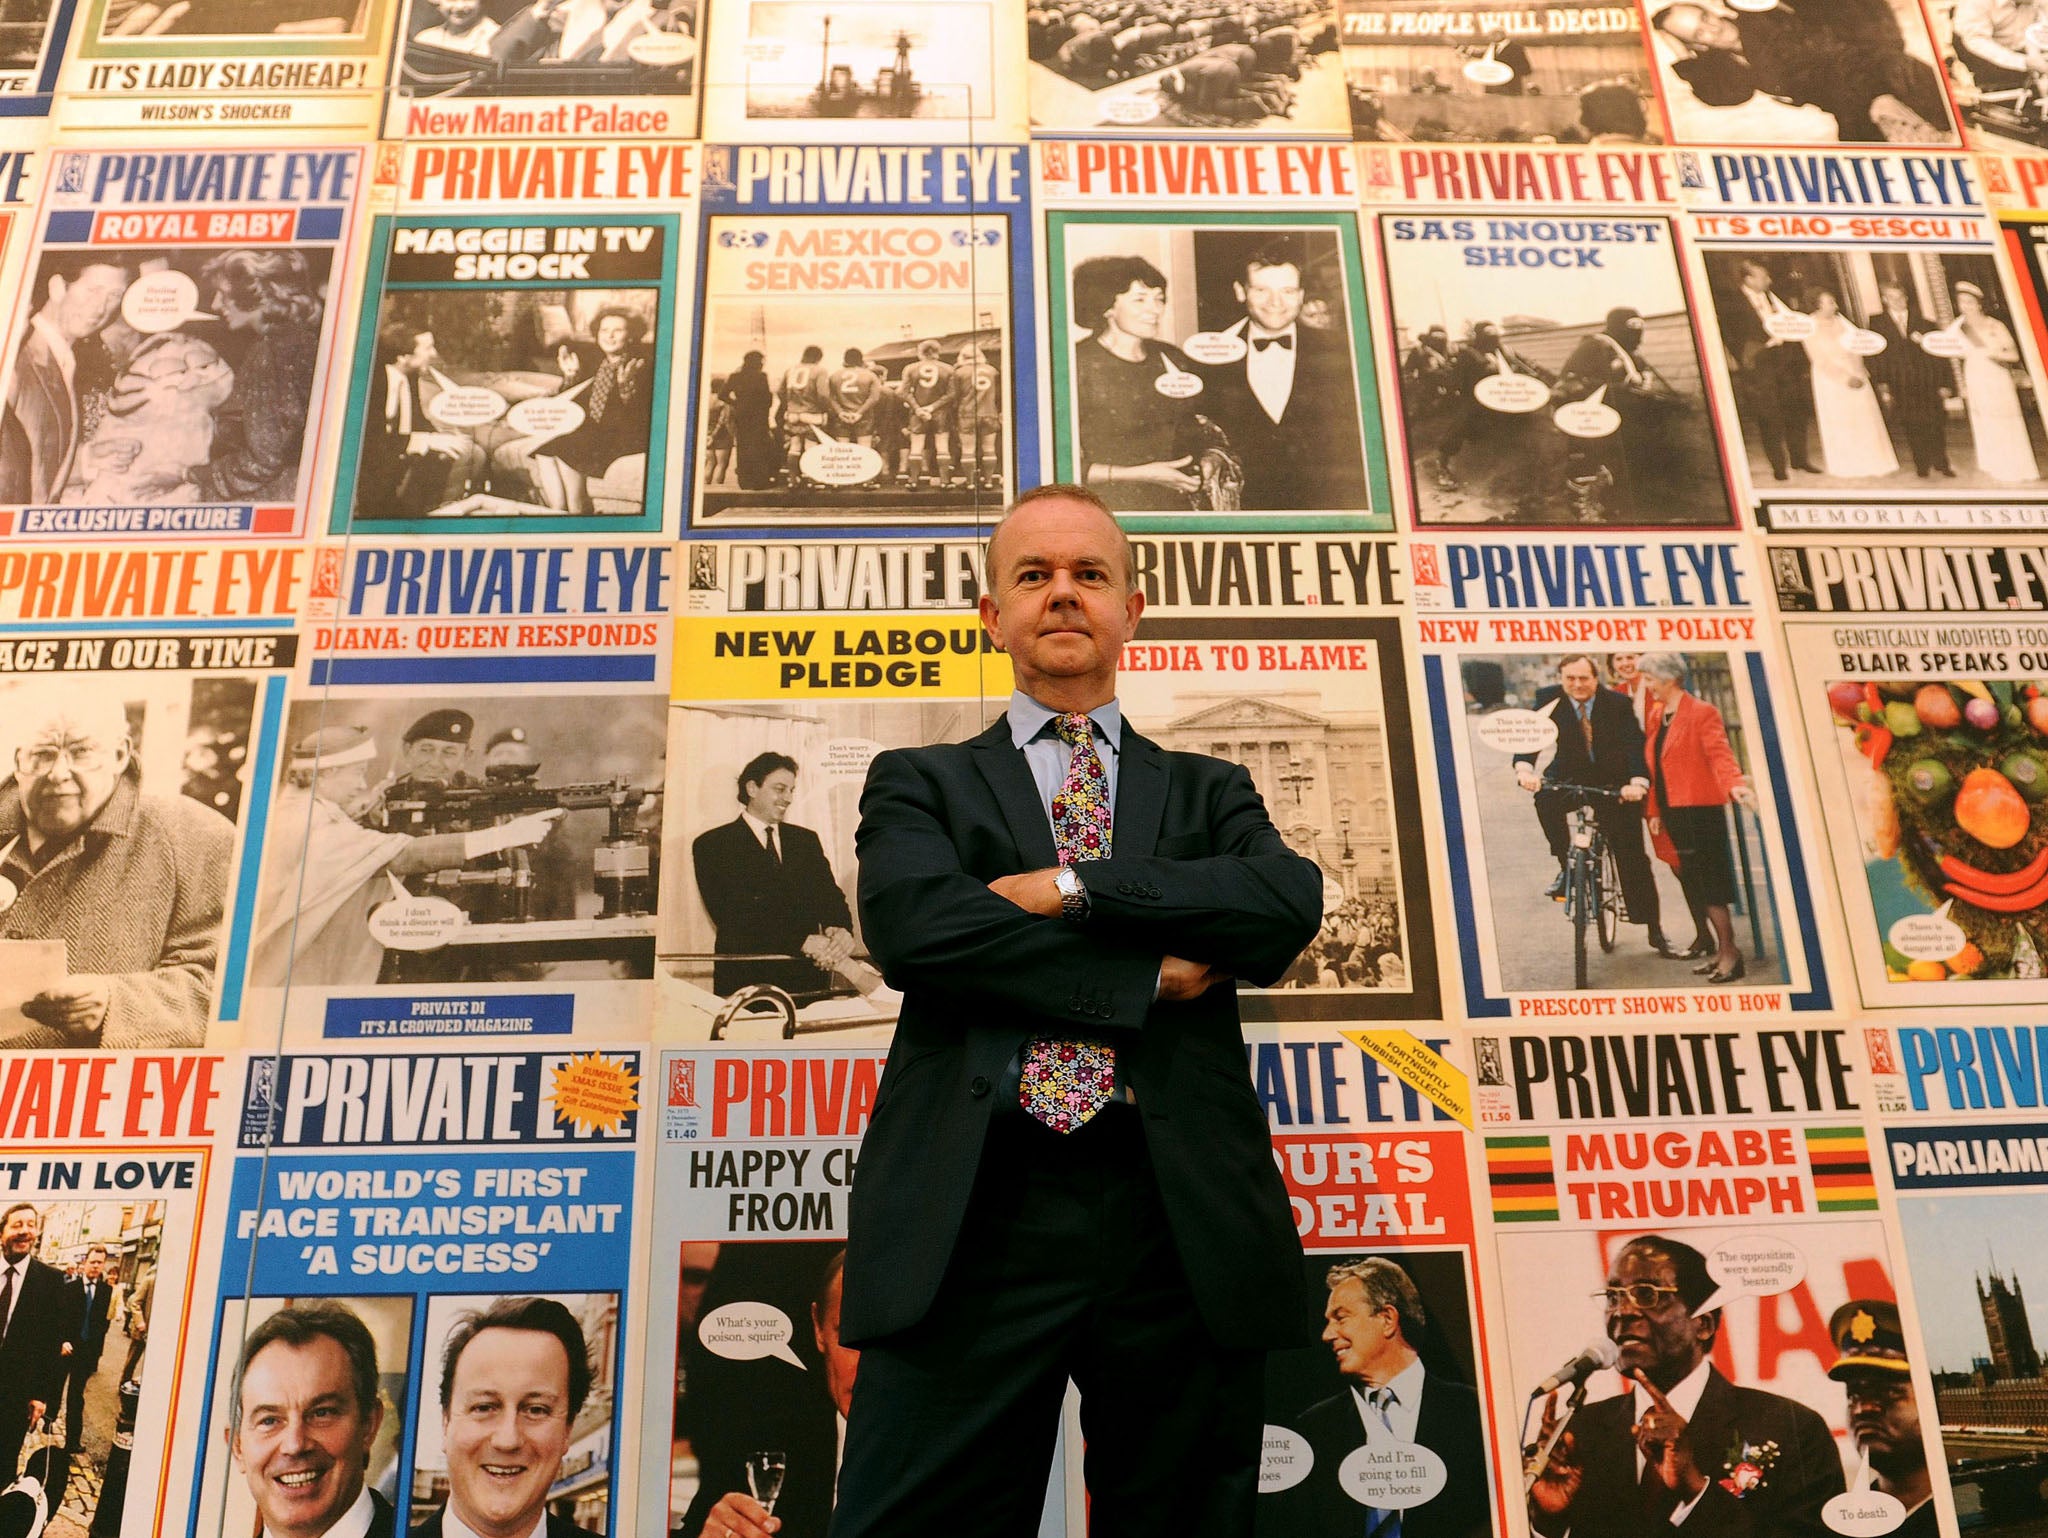 Ian Hislop, Editor of Private Eye